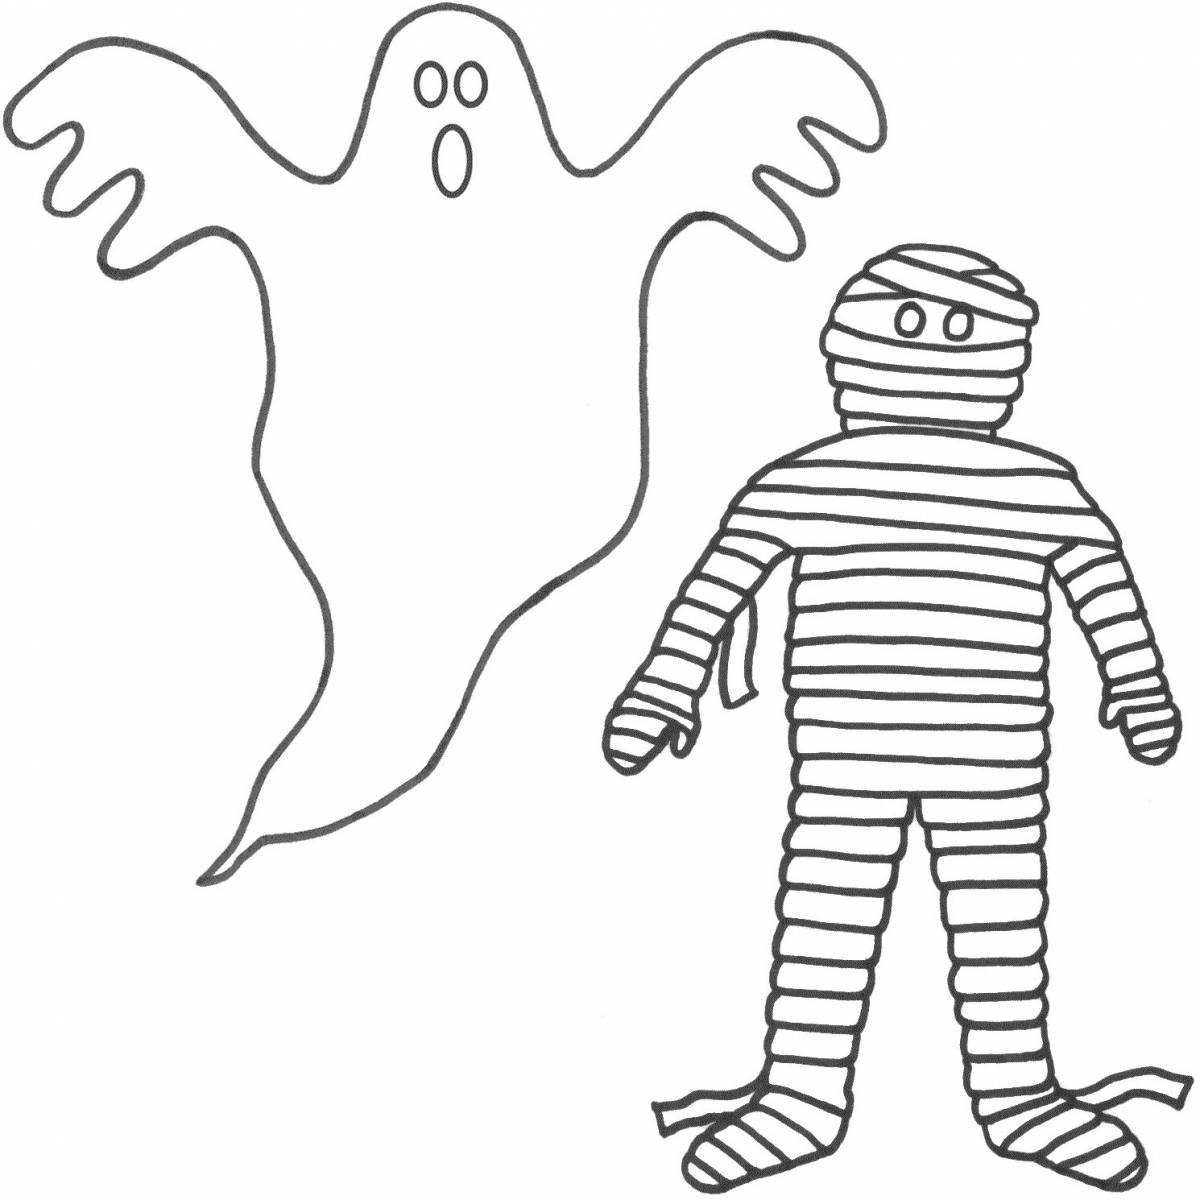 Unearthly ghost coloring for kids